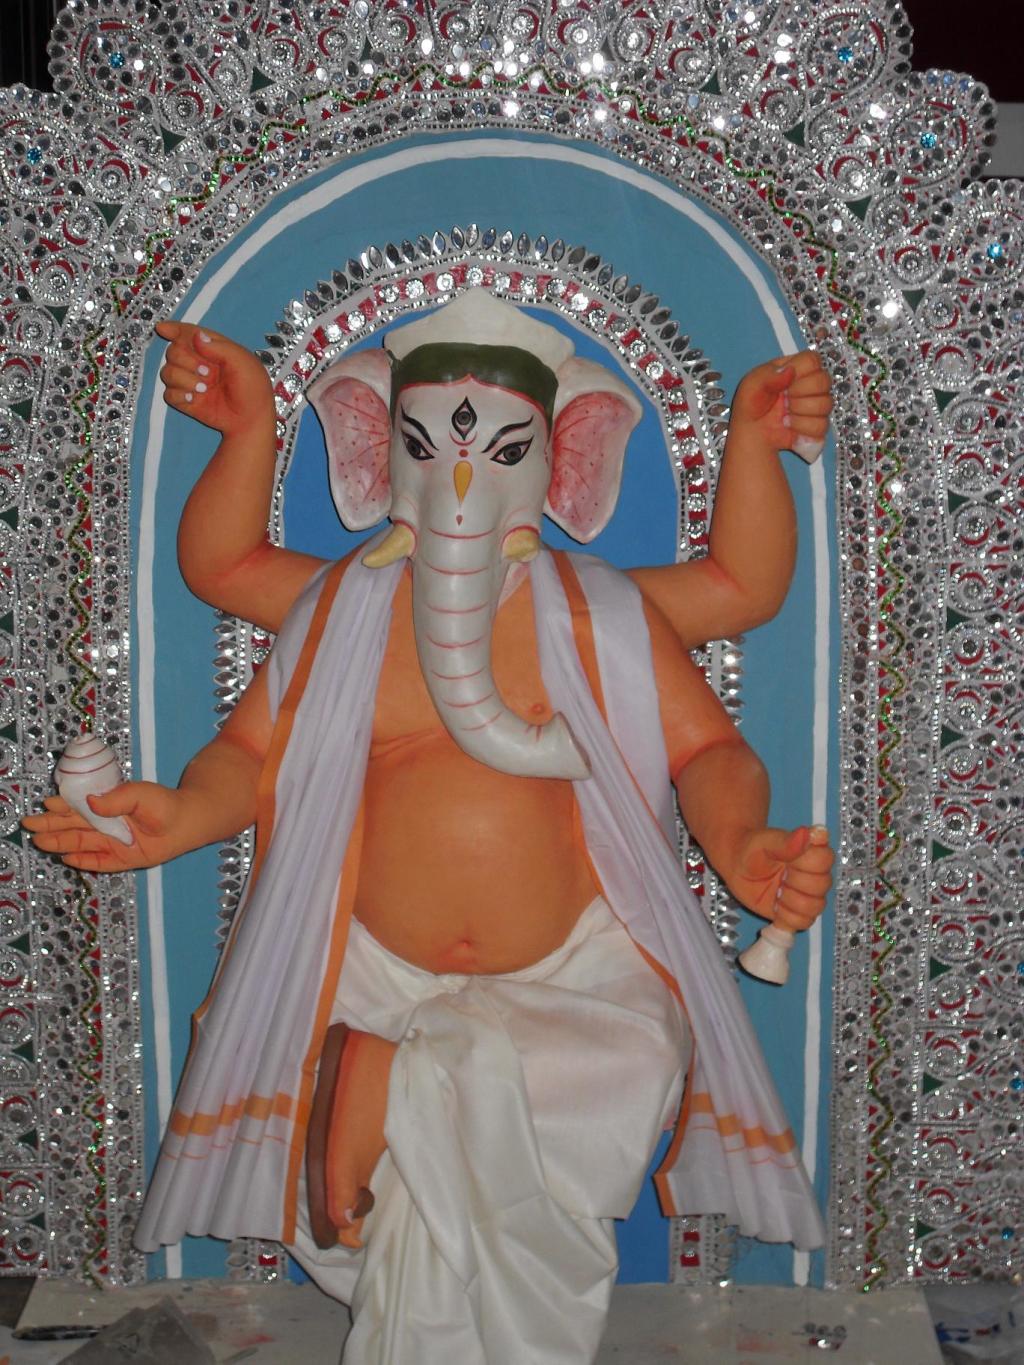 Ganesha, the lord of all living things